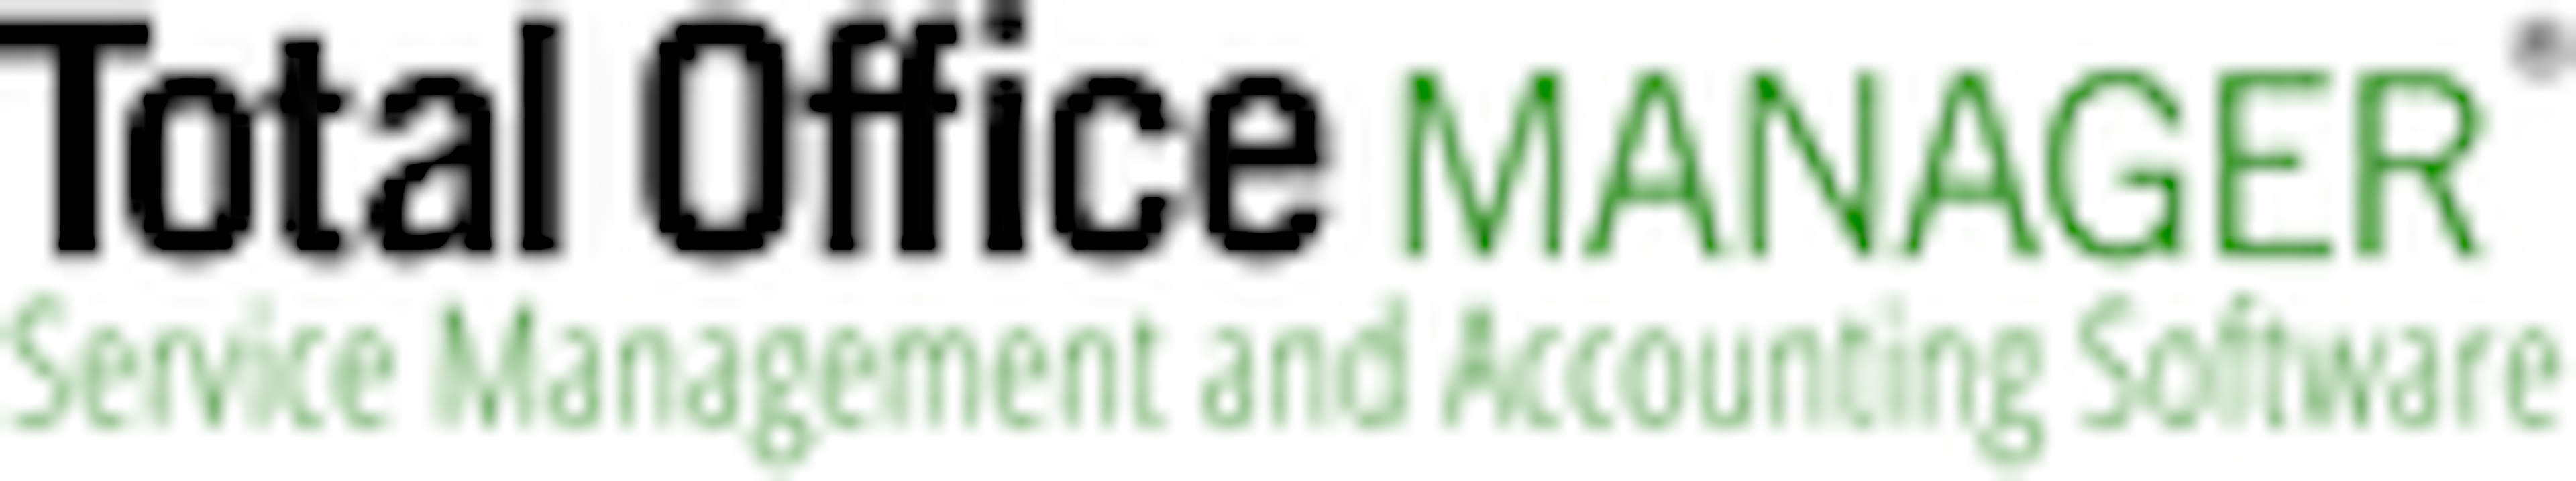 Total Office Manager Logo